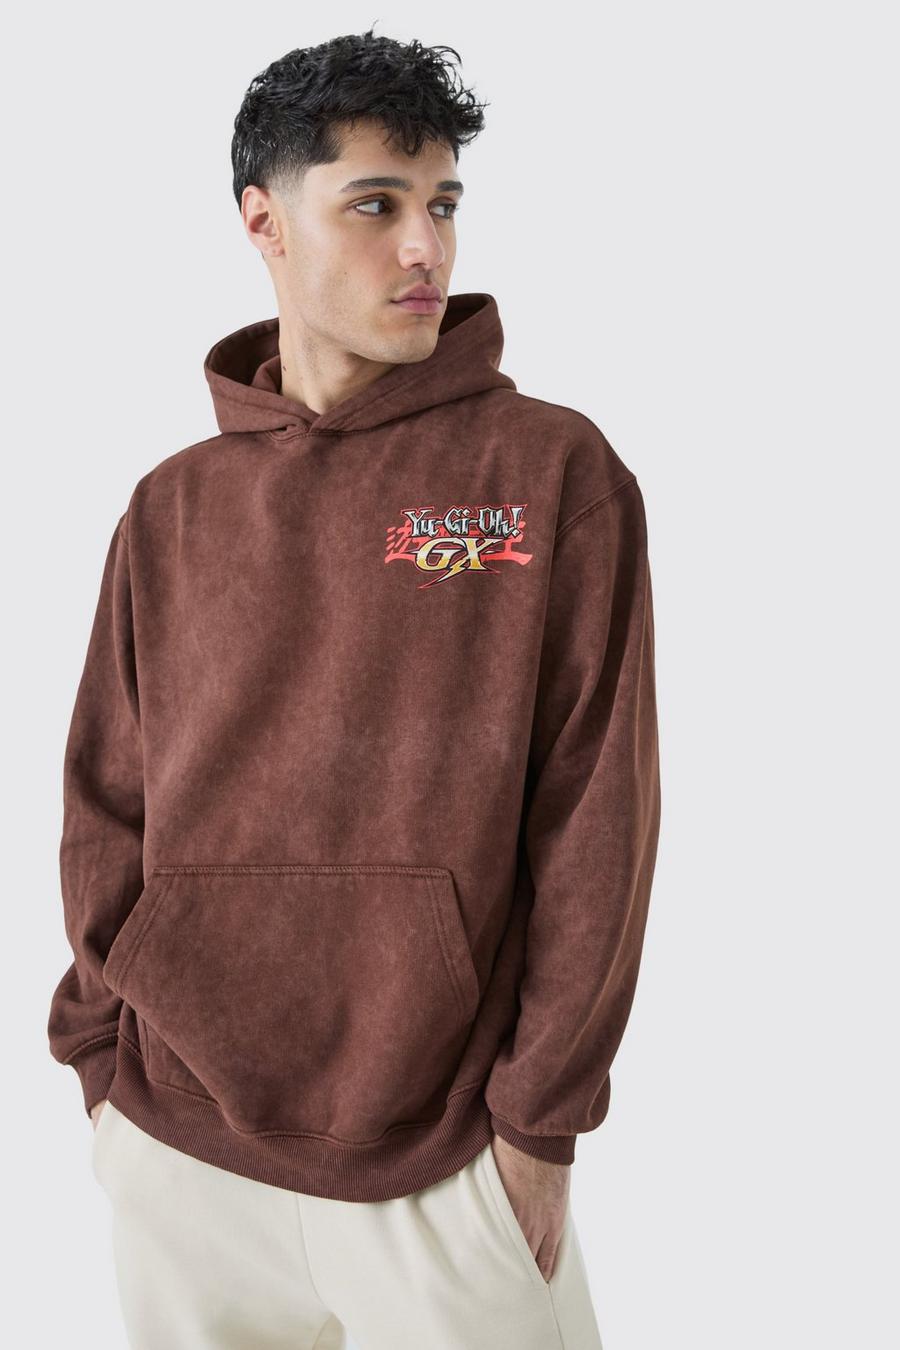 Brown Oversized Washed Yugioh Gx License Hoodie image number 1